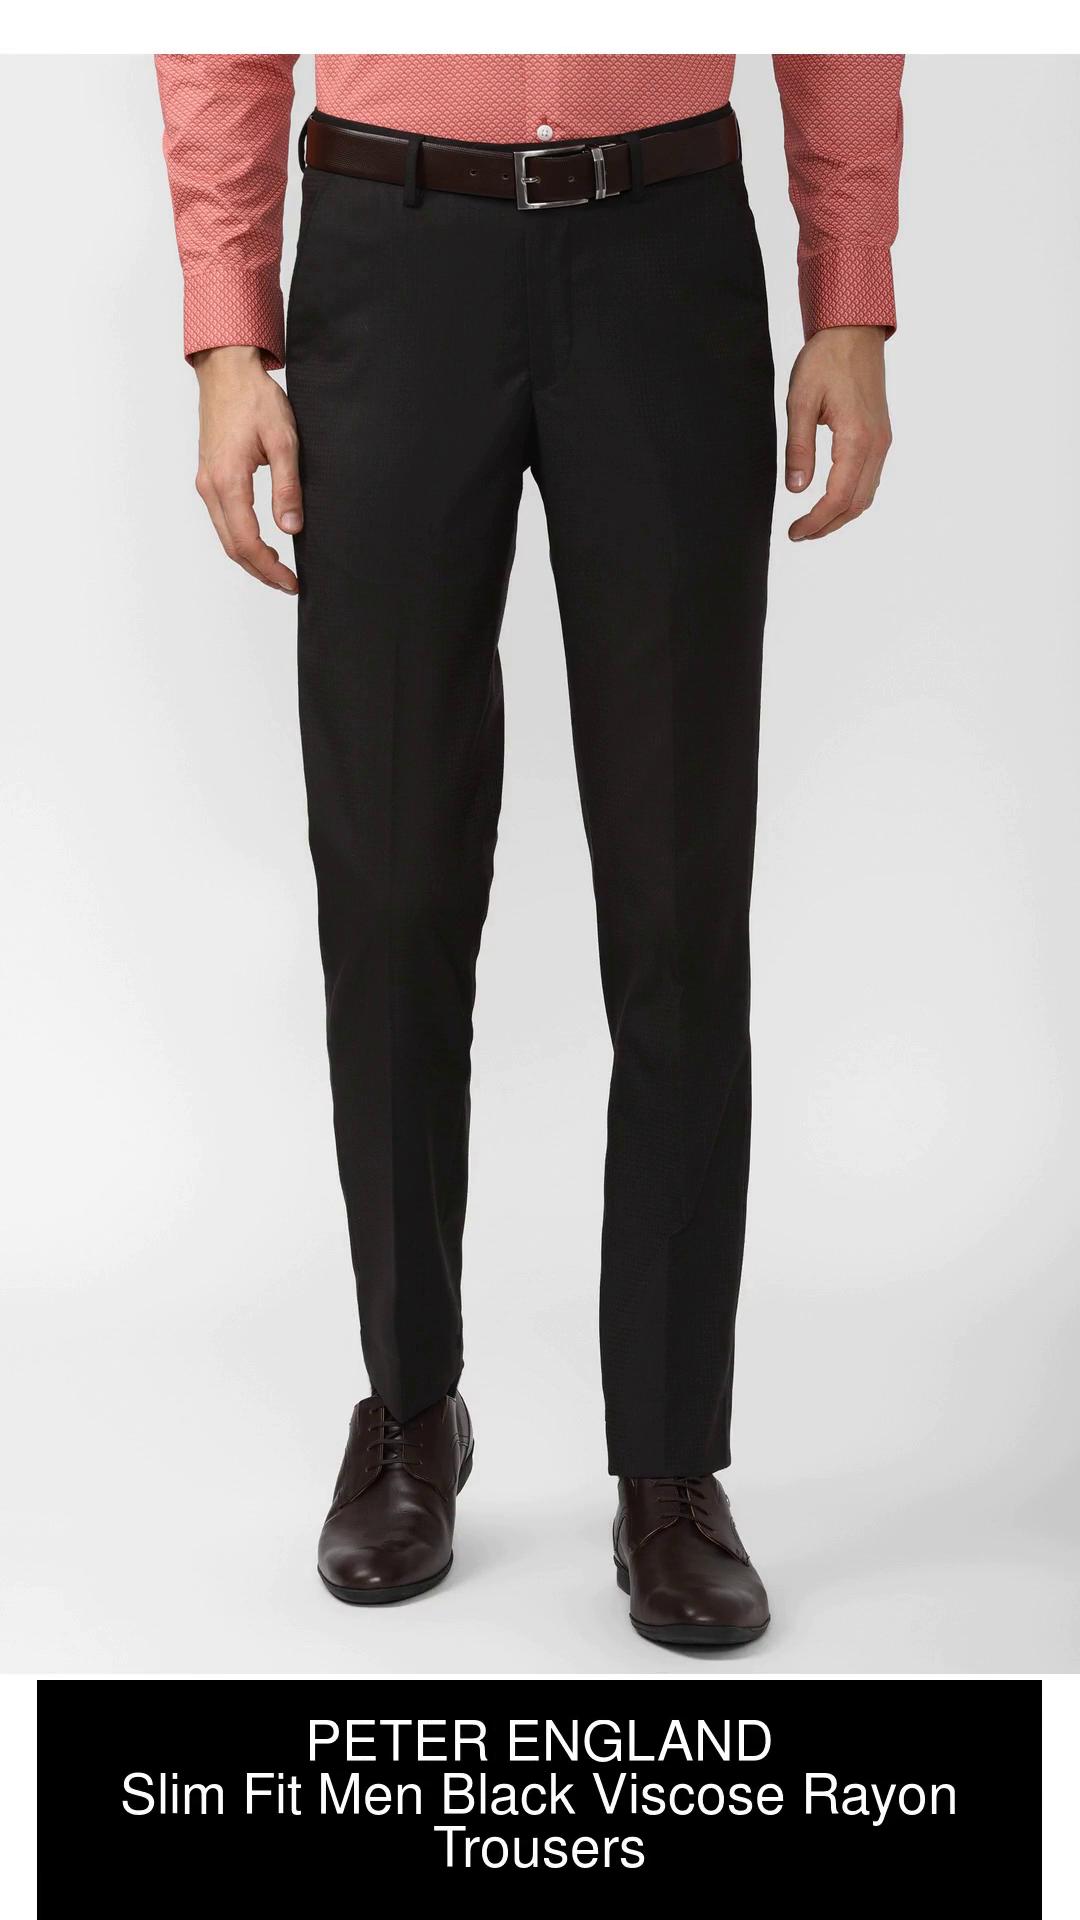 Buy Peter England Black Trousers at Amazonin